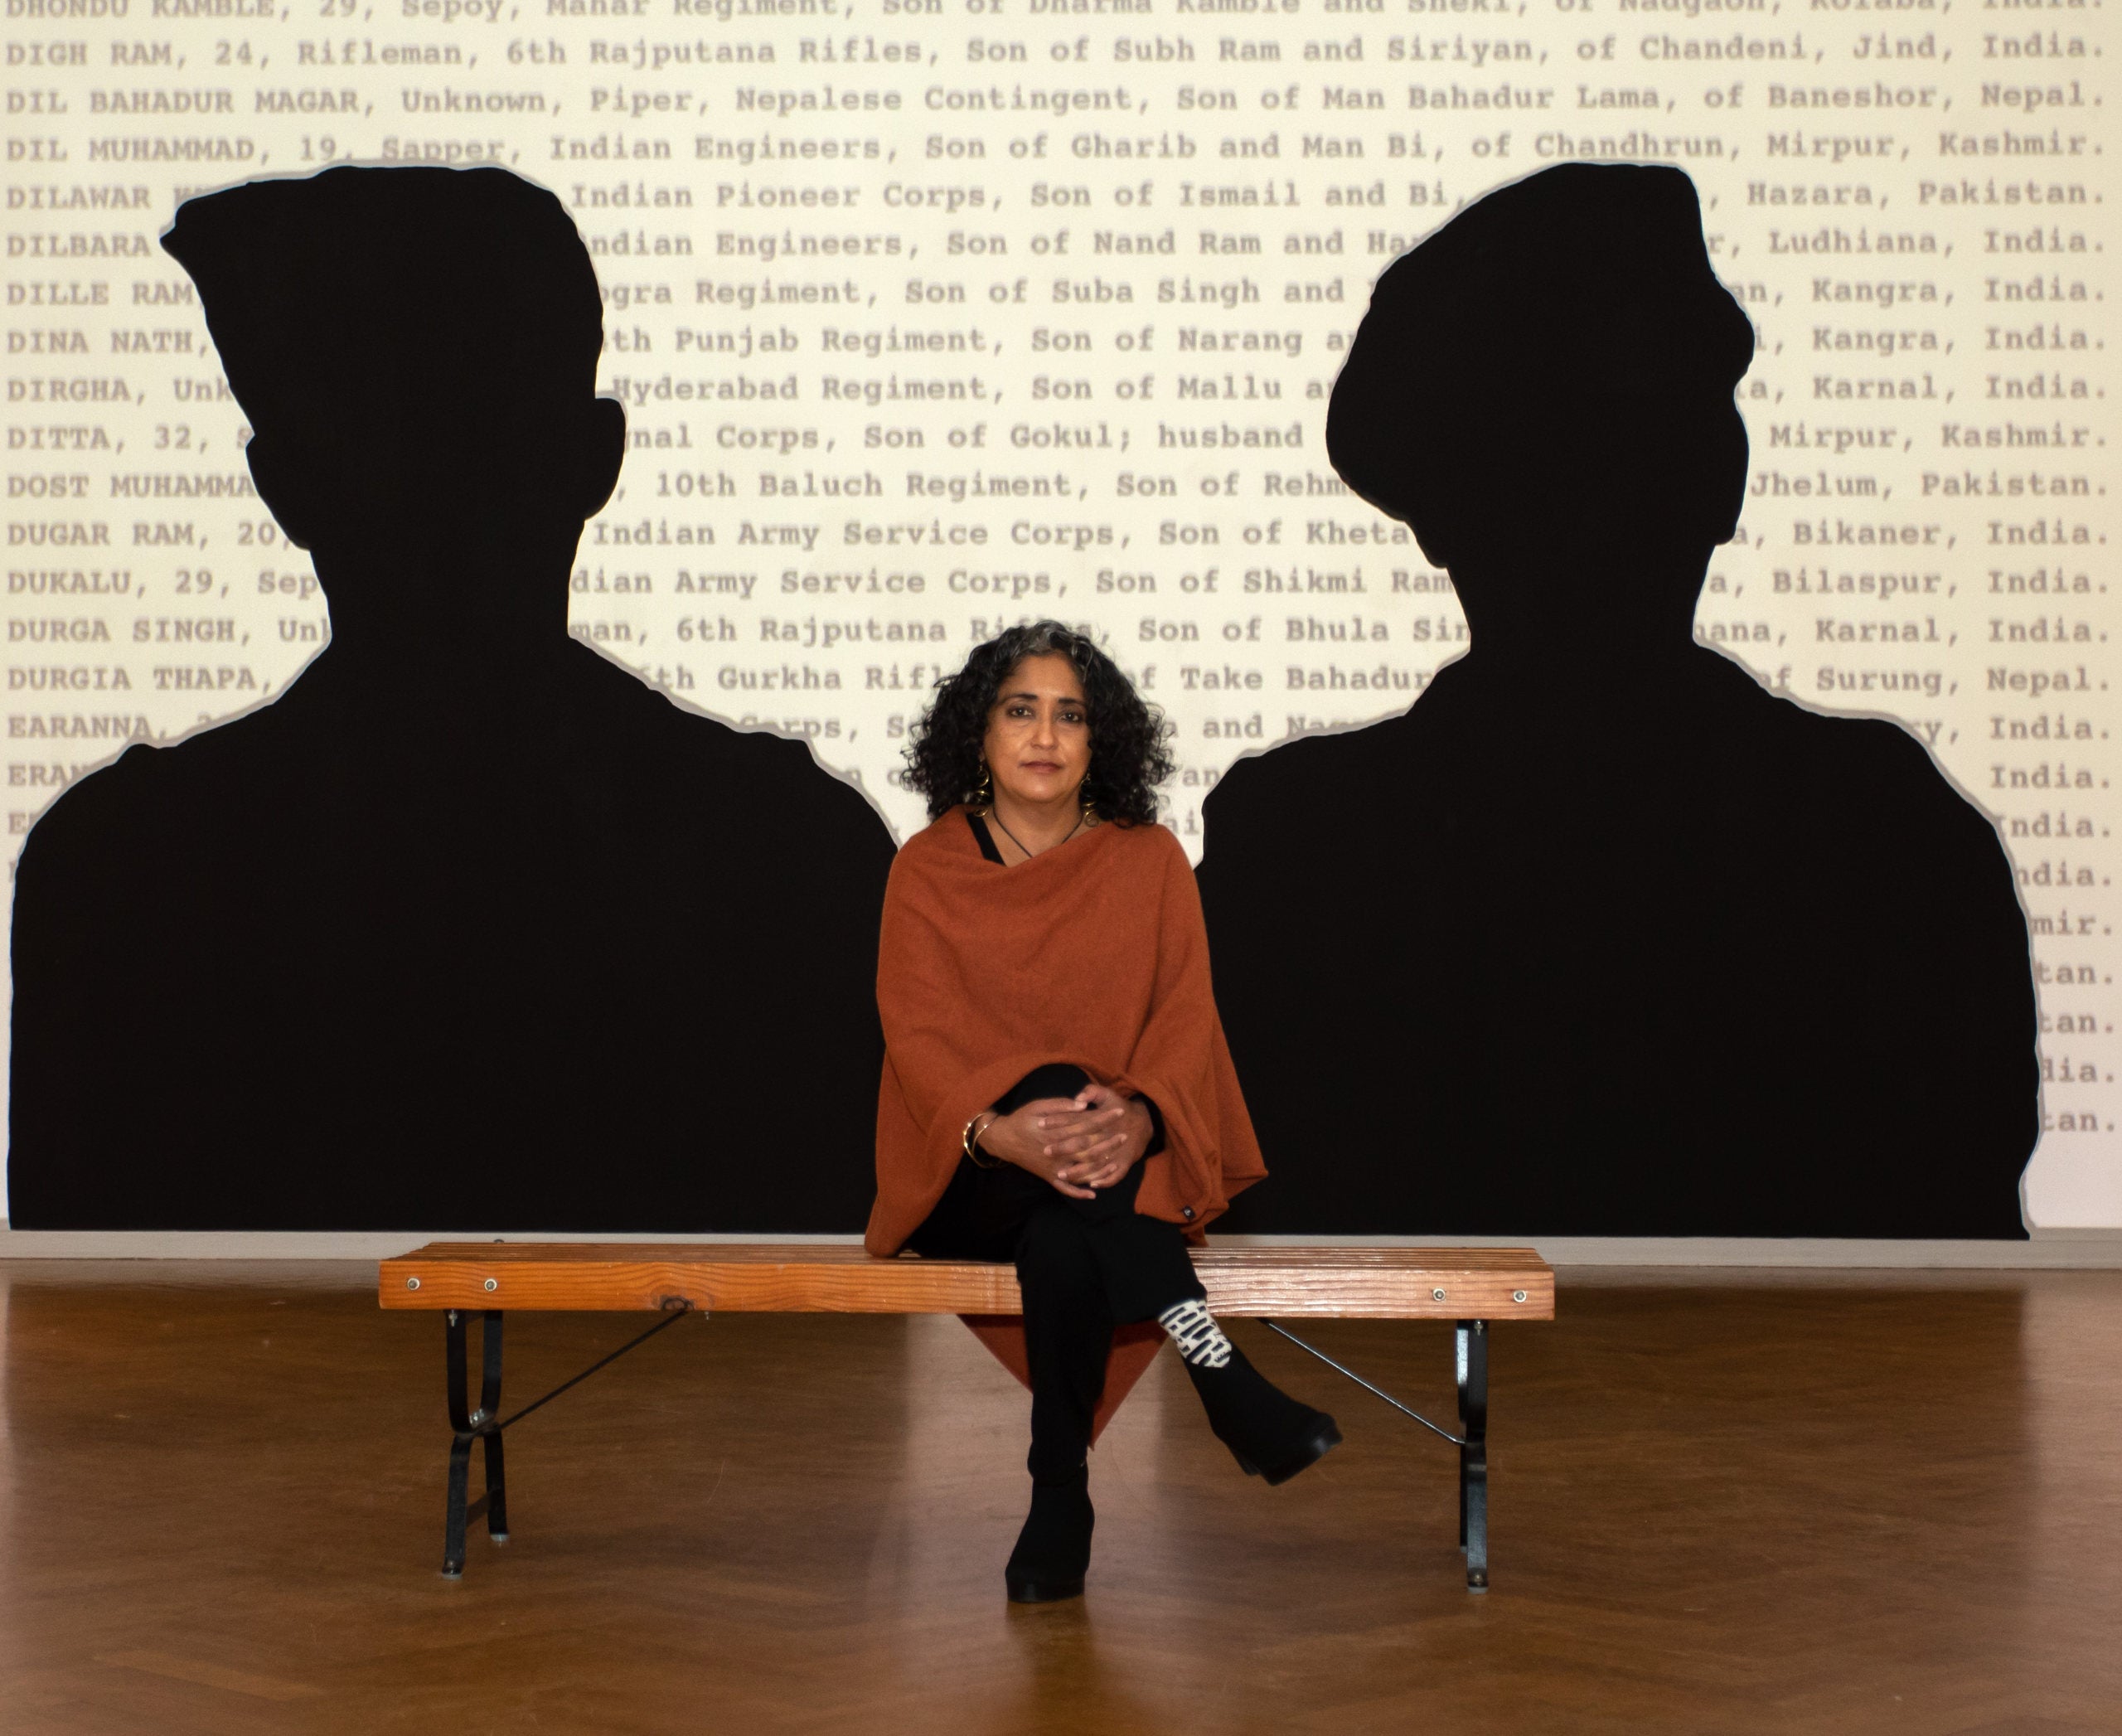 URI photography professor Annu Palakunnathu Matthew, seated in a gallery in front of one of her silhouetted artworks